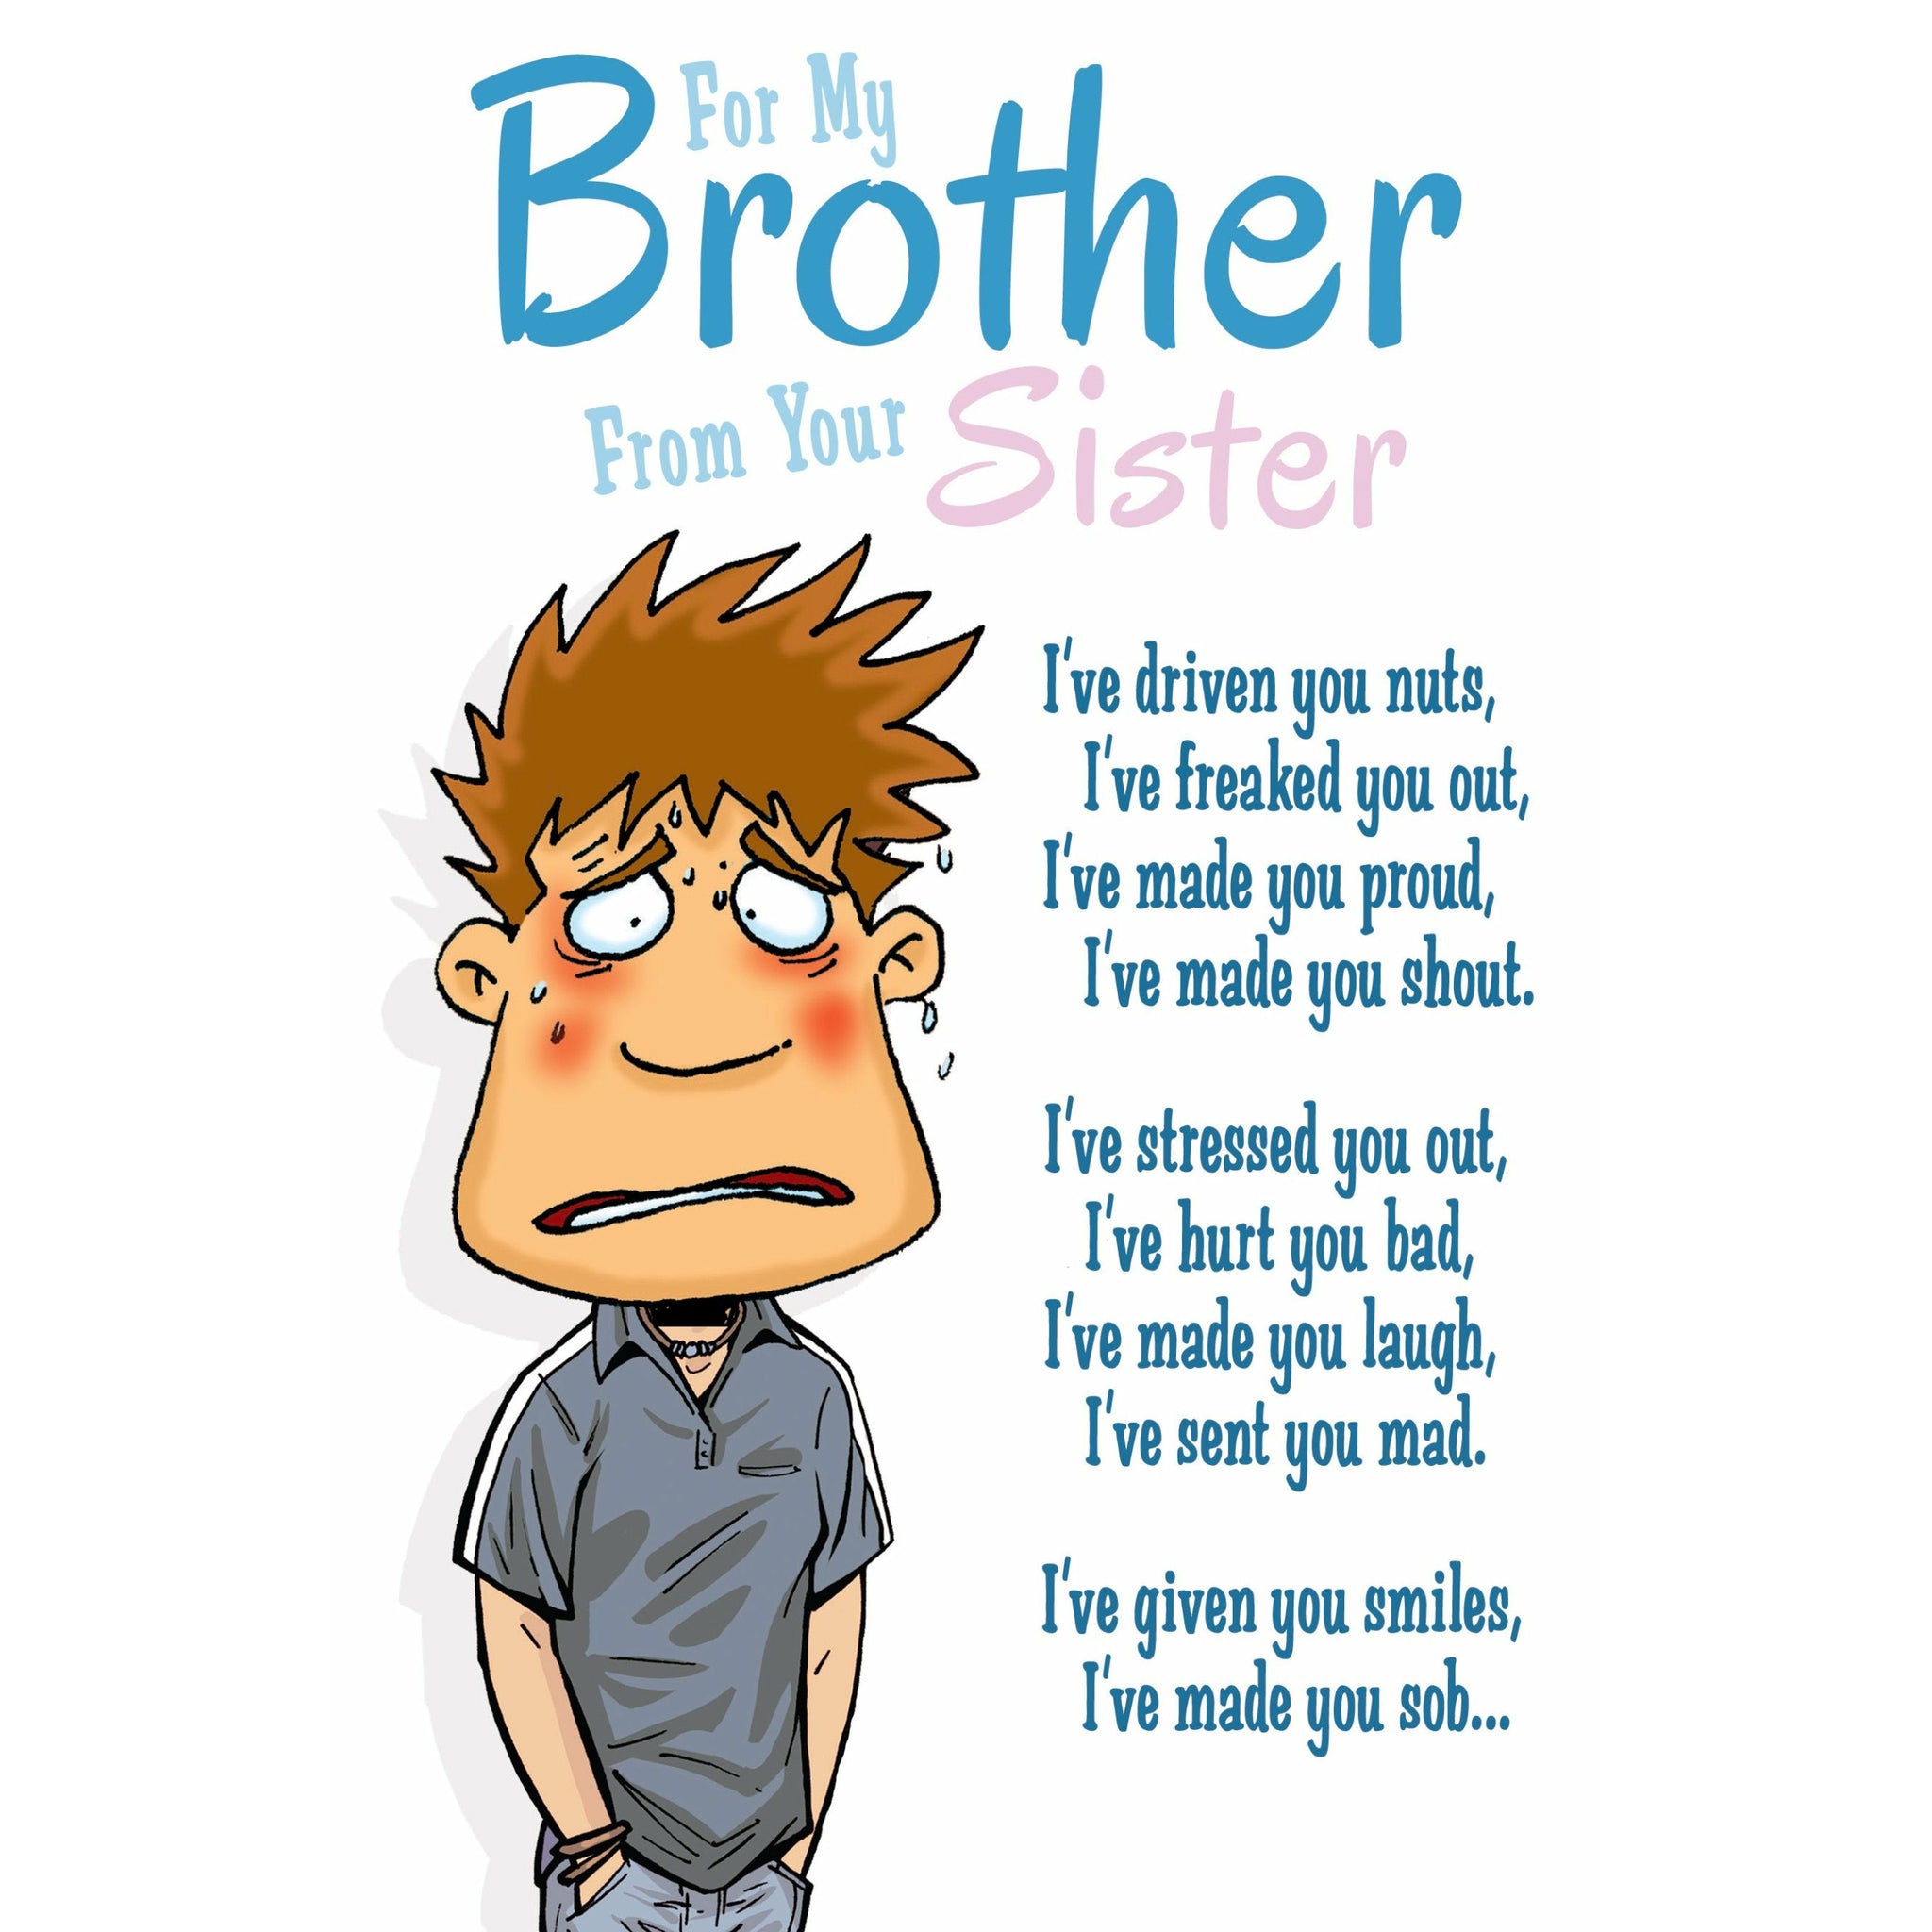 Face Ache, My Job, Brother From Sister Greetings Card